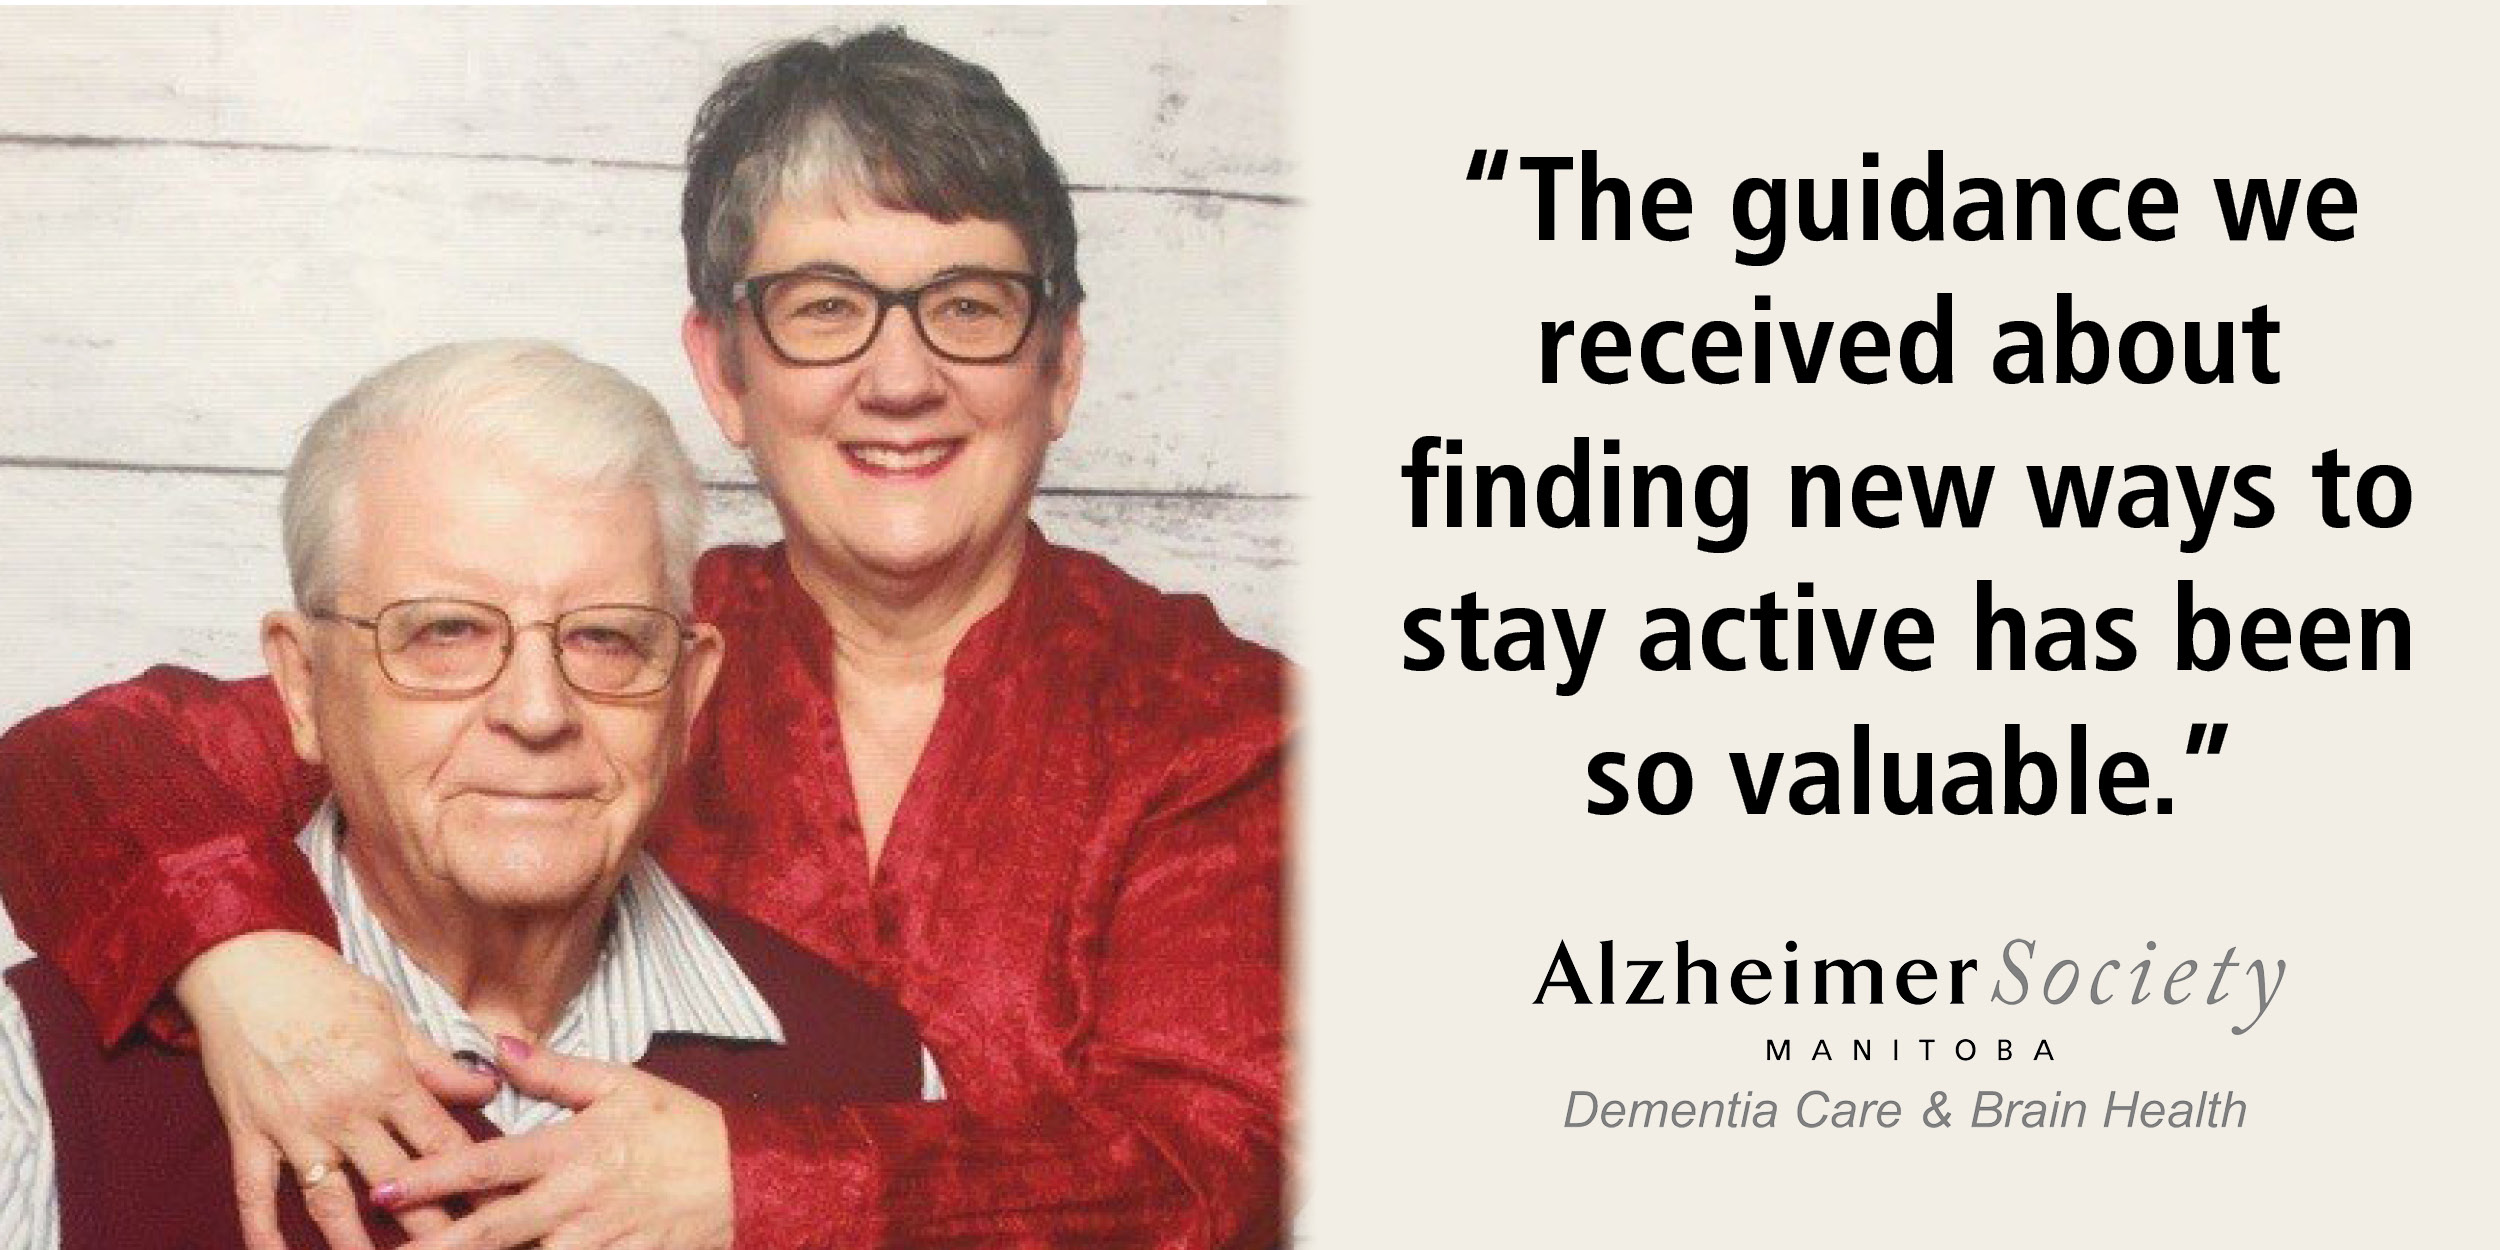 Jill and Keith Kennedy smiling. A quote reads: “The guidance we received about finding new ways to stay active has been so valuable.”